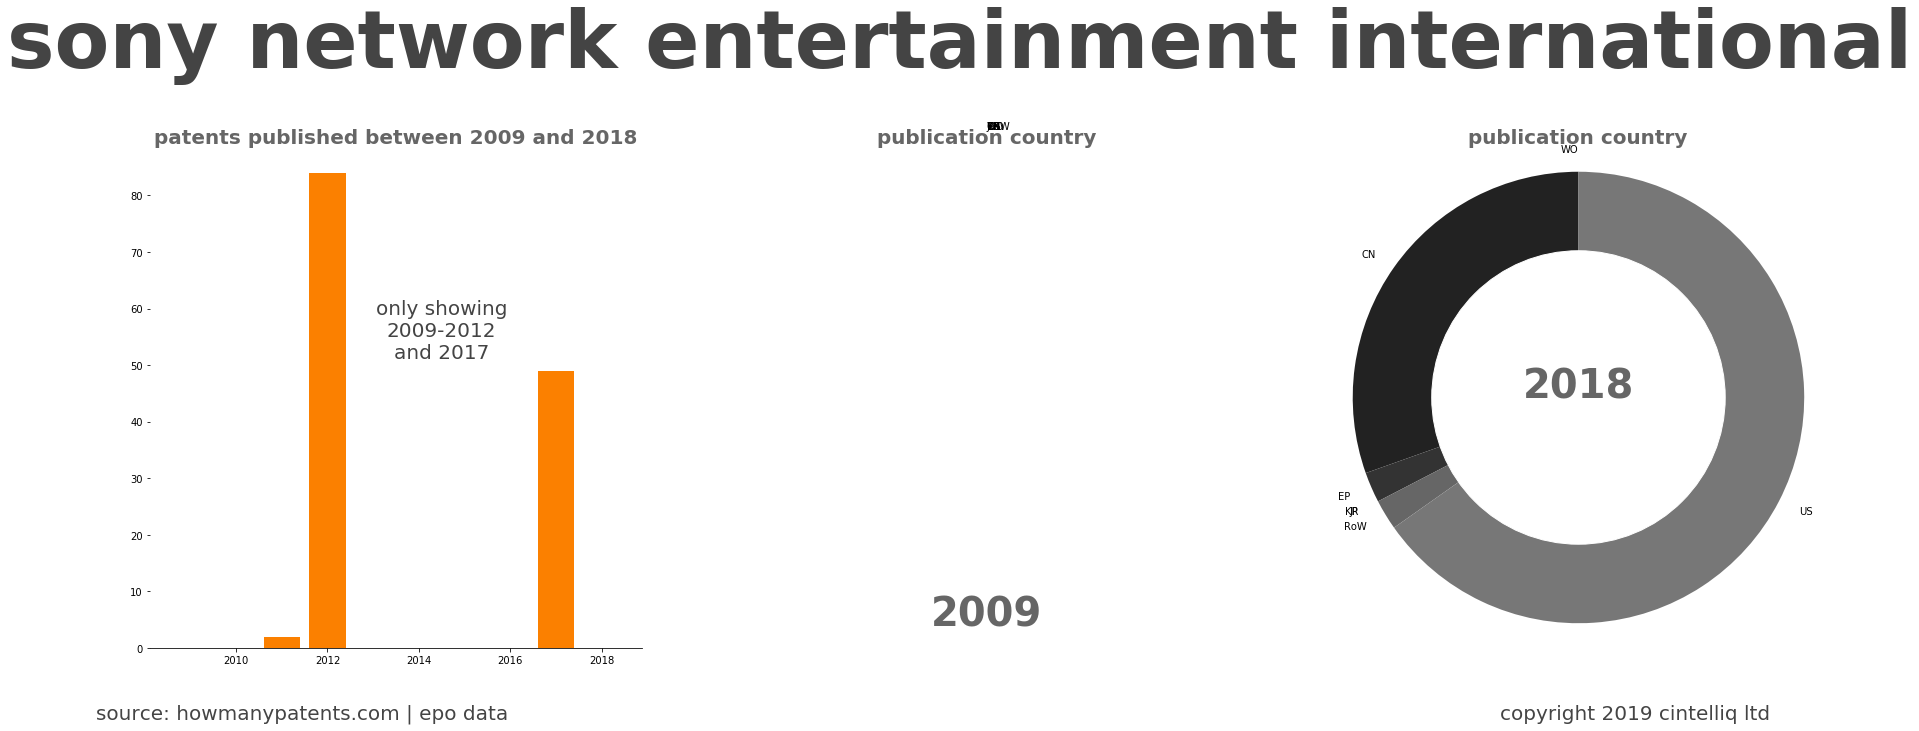 summary of patents for Sony Network Entertainment International